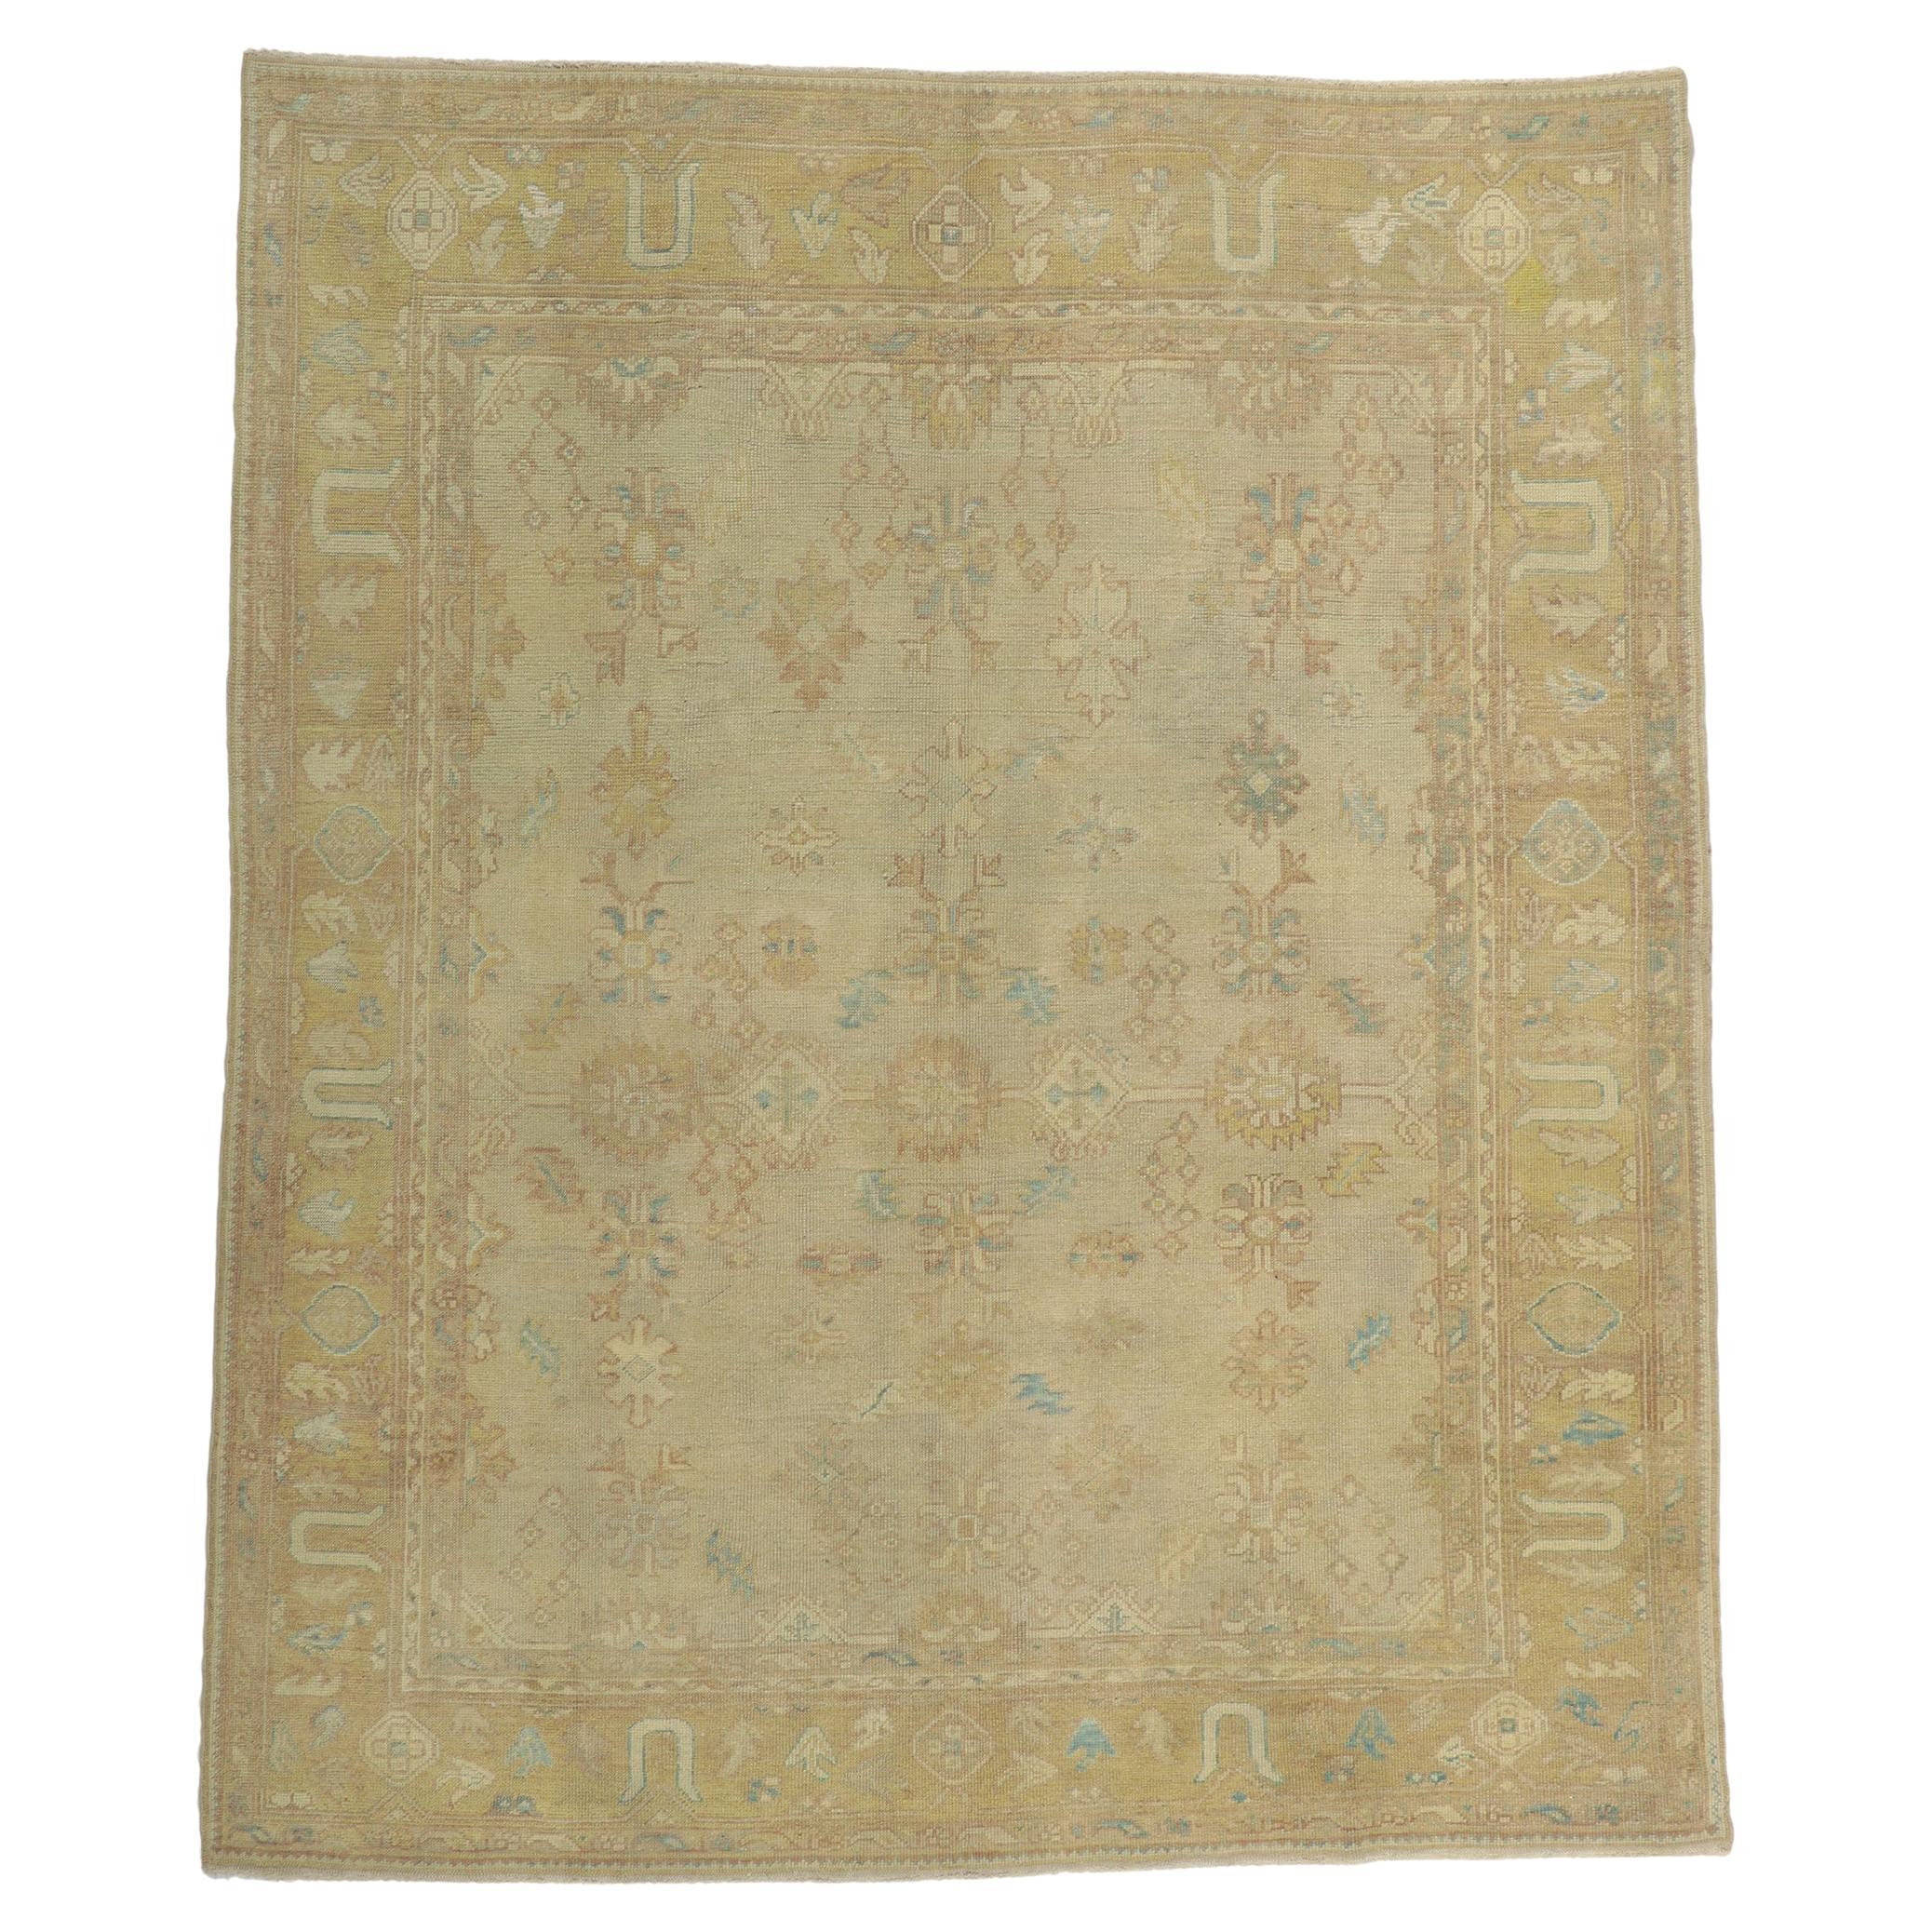 New Vintage-Style Turkish Oushak Rug with Soft Earth-Tone Colors